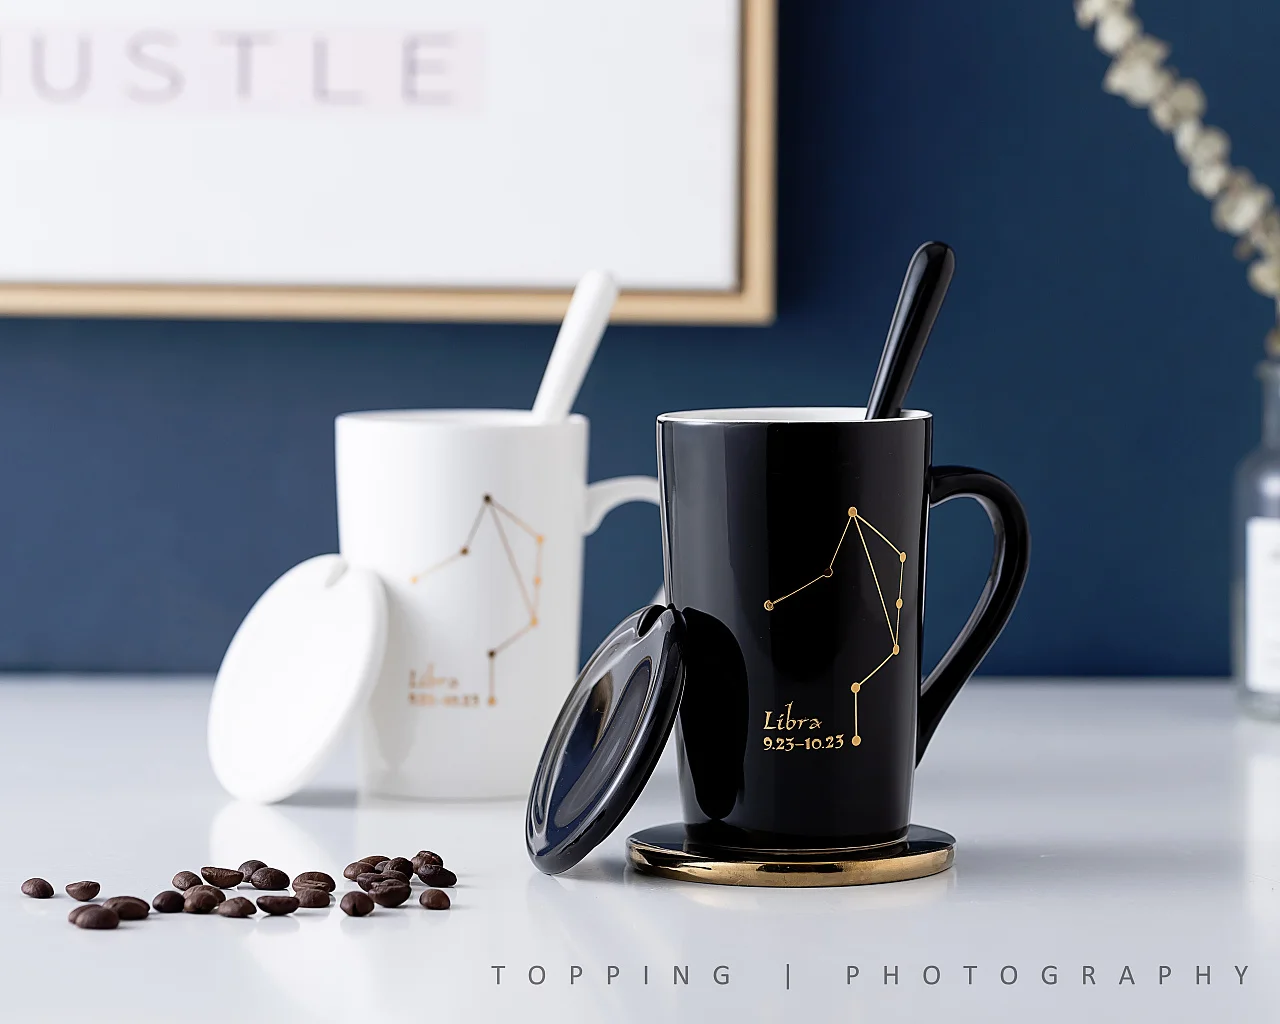 Constellations Ceramic Coffee Milk Mug with Spoon Lid Black and Porcelain Zodiac Ceramic Cup